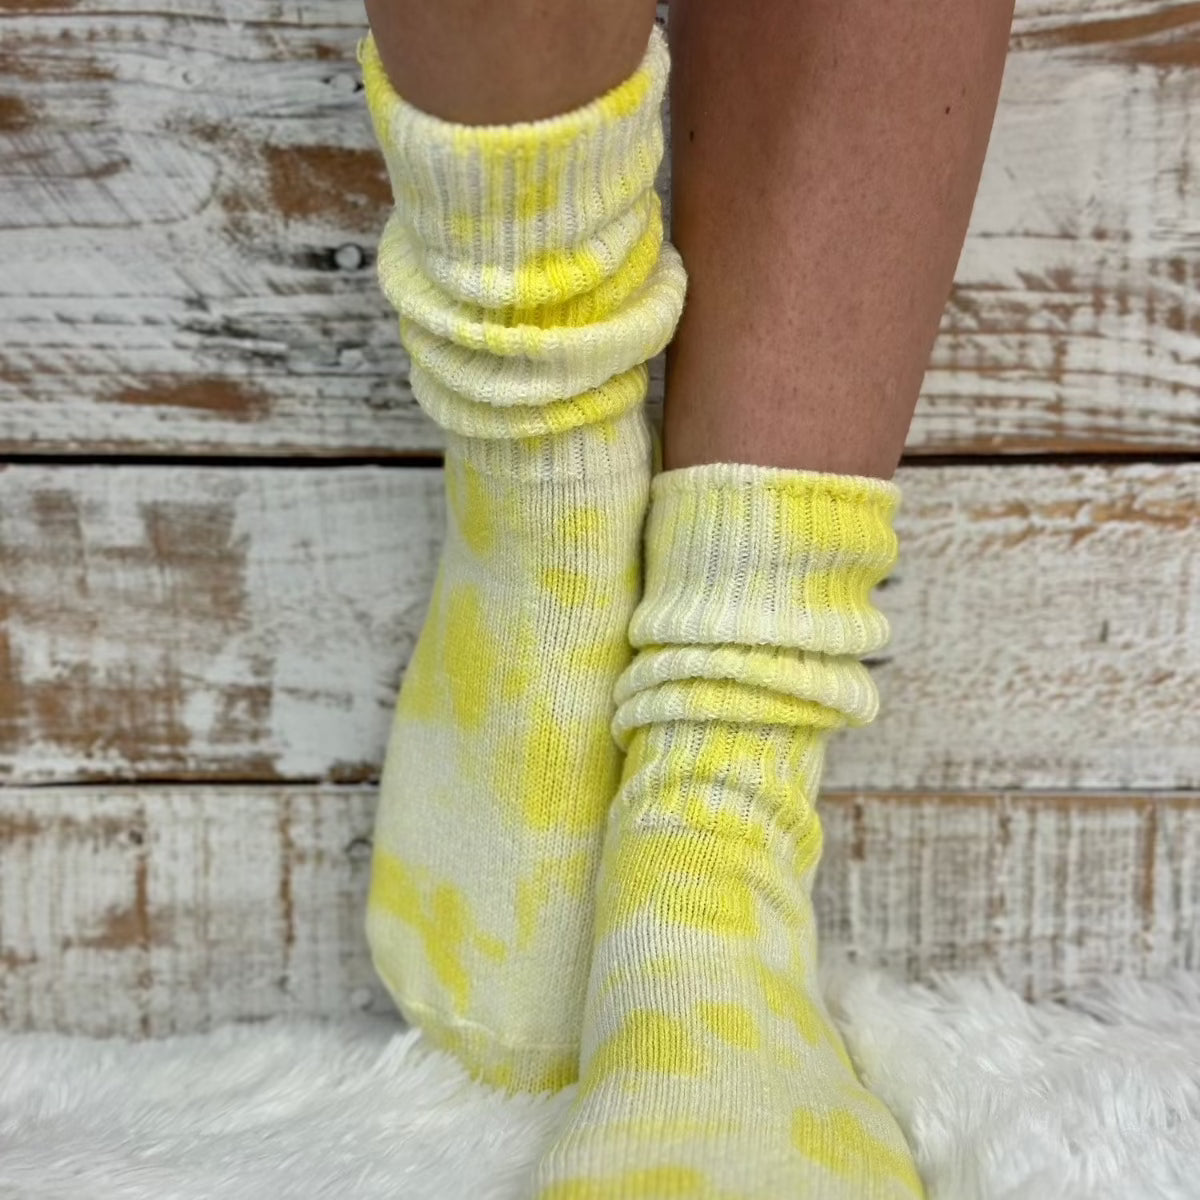 Mini cute scrunchy tie dye yellow organic slouch socks Made in USA , tie-dyed ankle socks cotton 